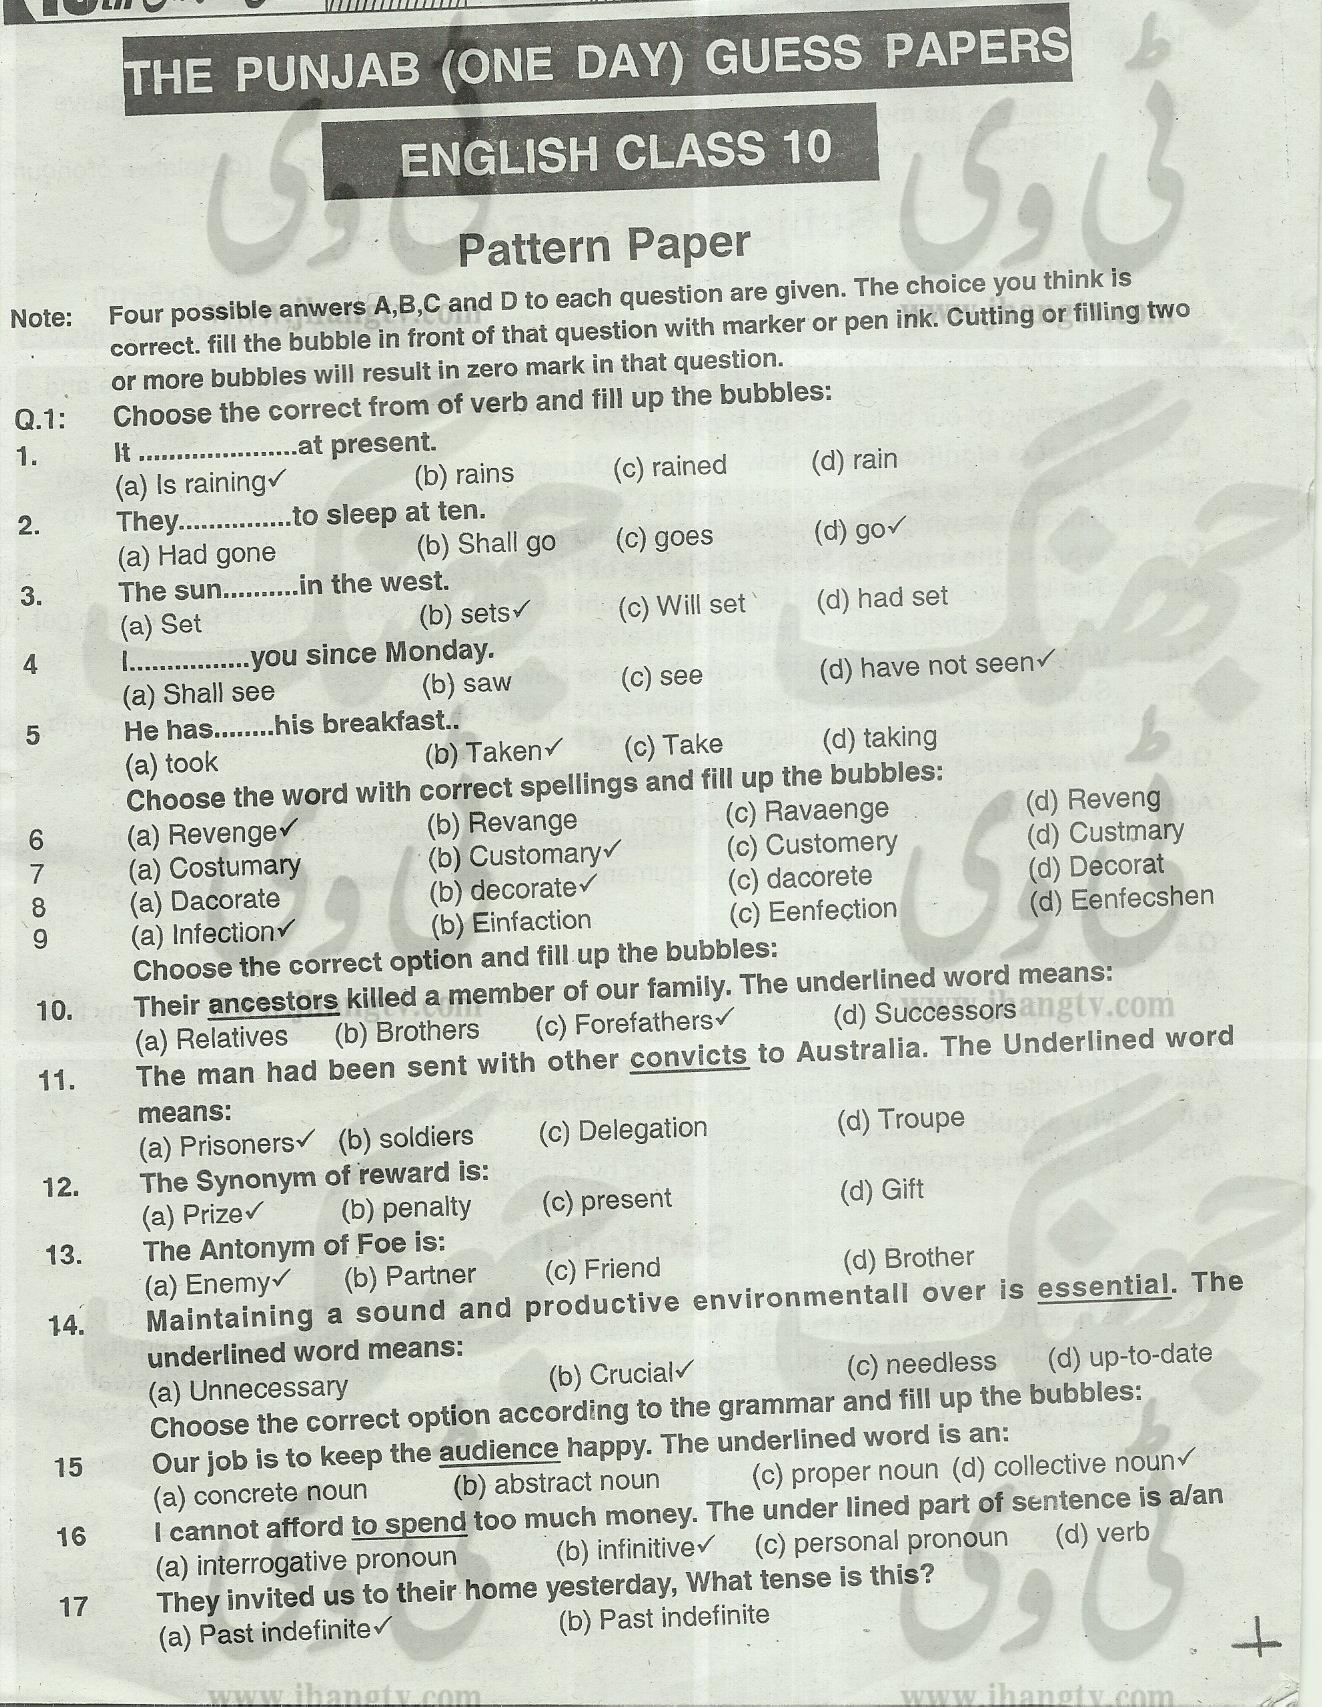 10th class guess papers 20140048 copy